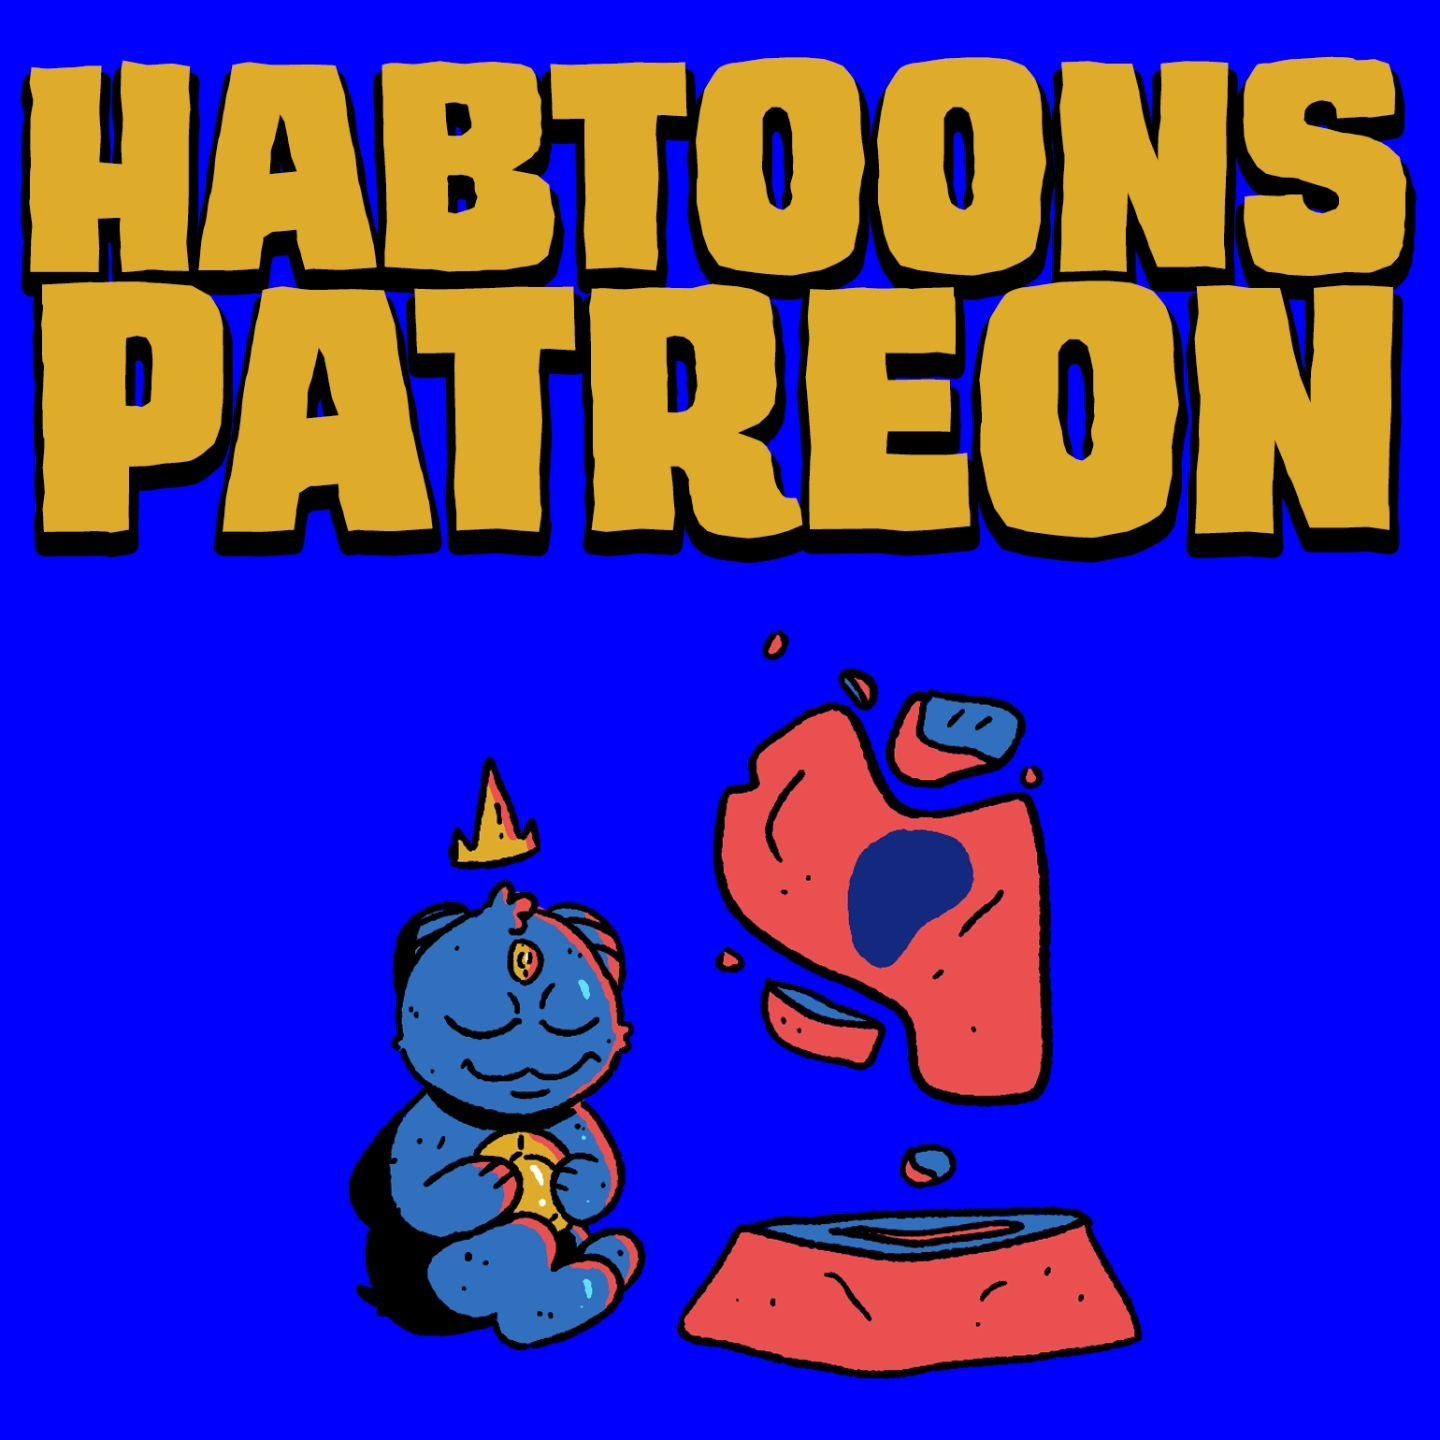 [ SWIPE --&gt; ] The Habtoons Patreon is here and evolving! 
I've been working diligently to bring this platform to a new level for myself and for you. There's so much I want to accomplish and share. From digital comics to in-person events, it all st